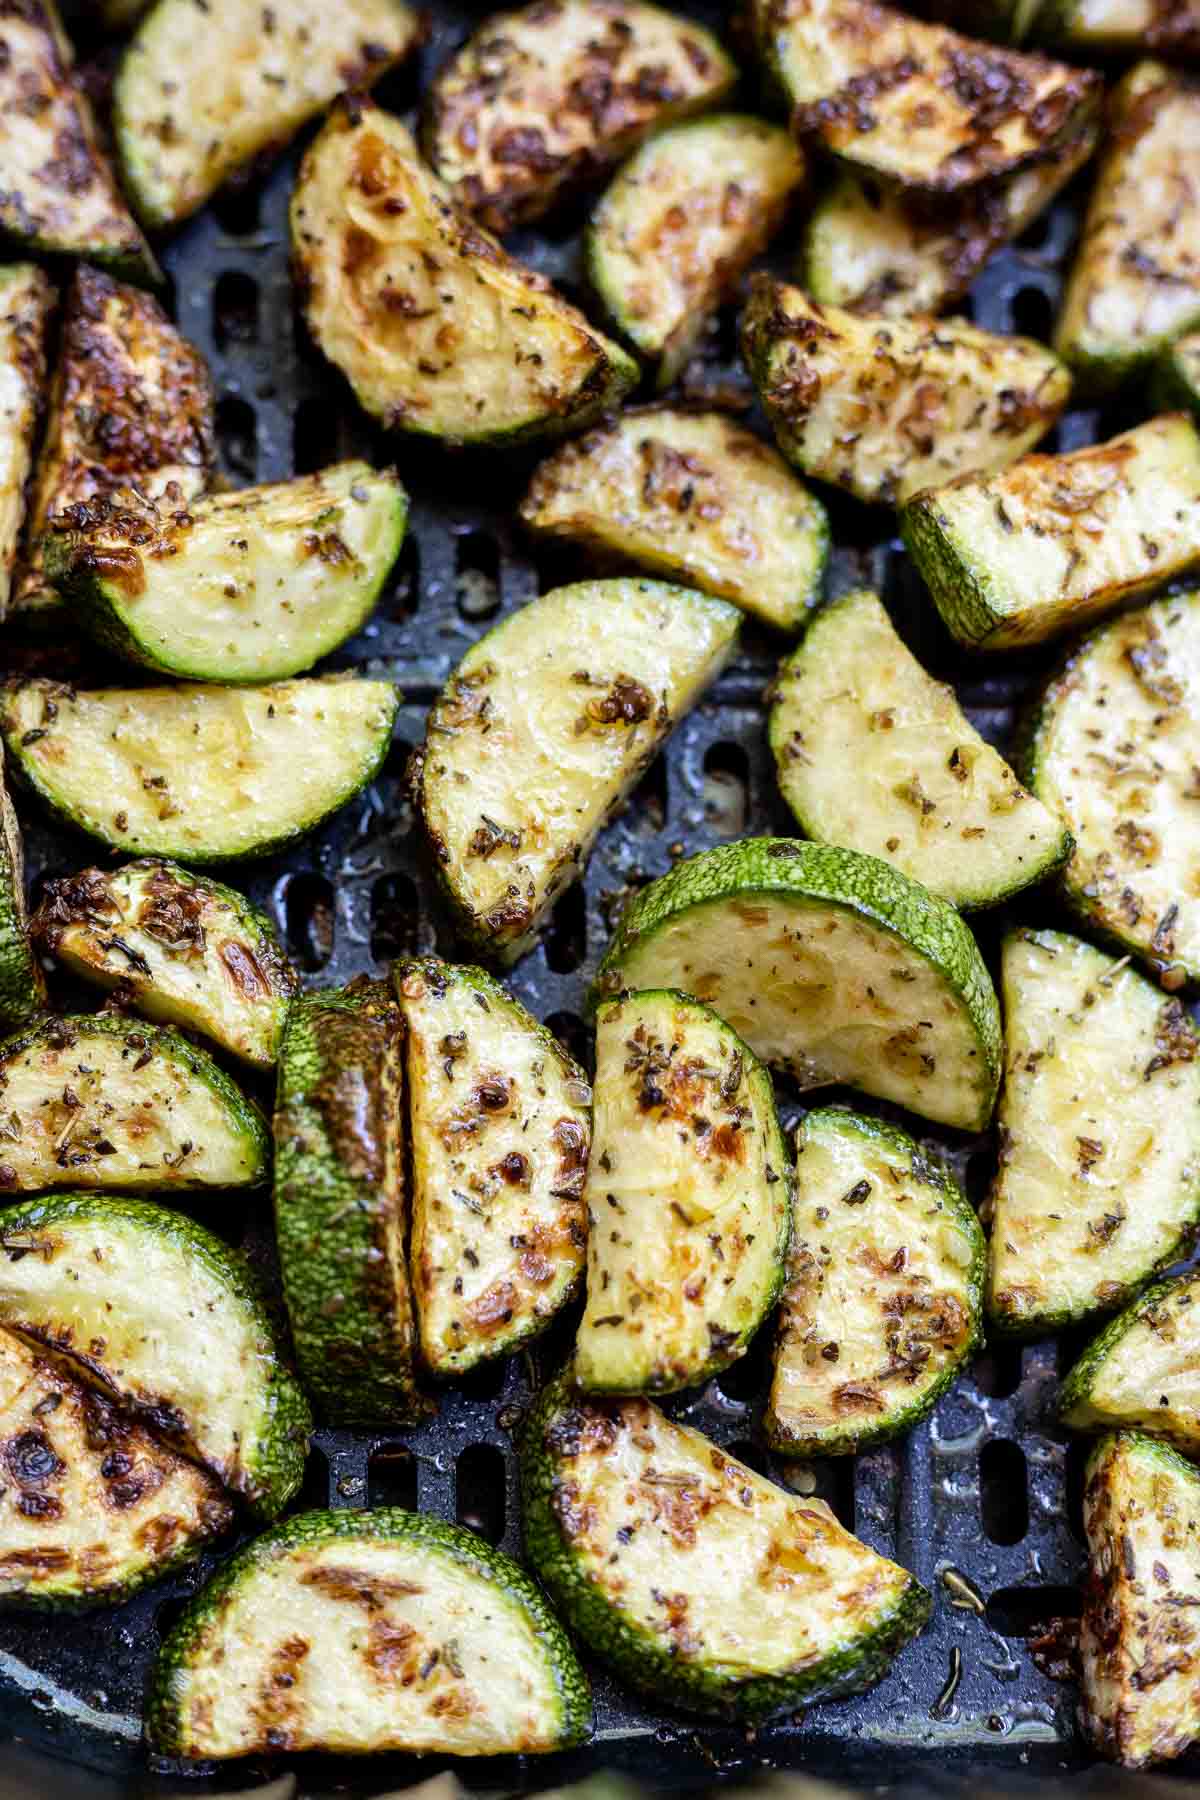 cooked zucchini in air fryer basket